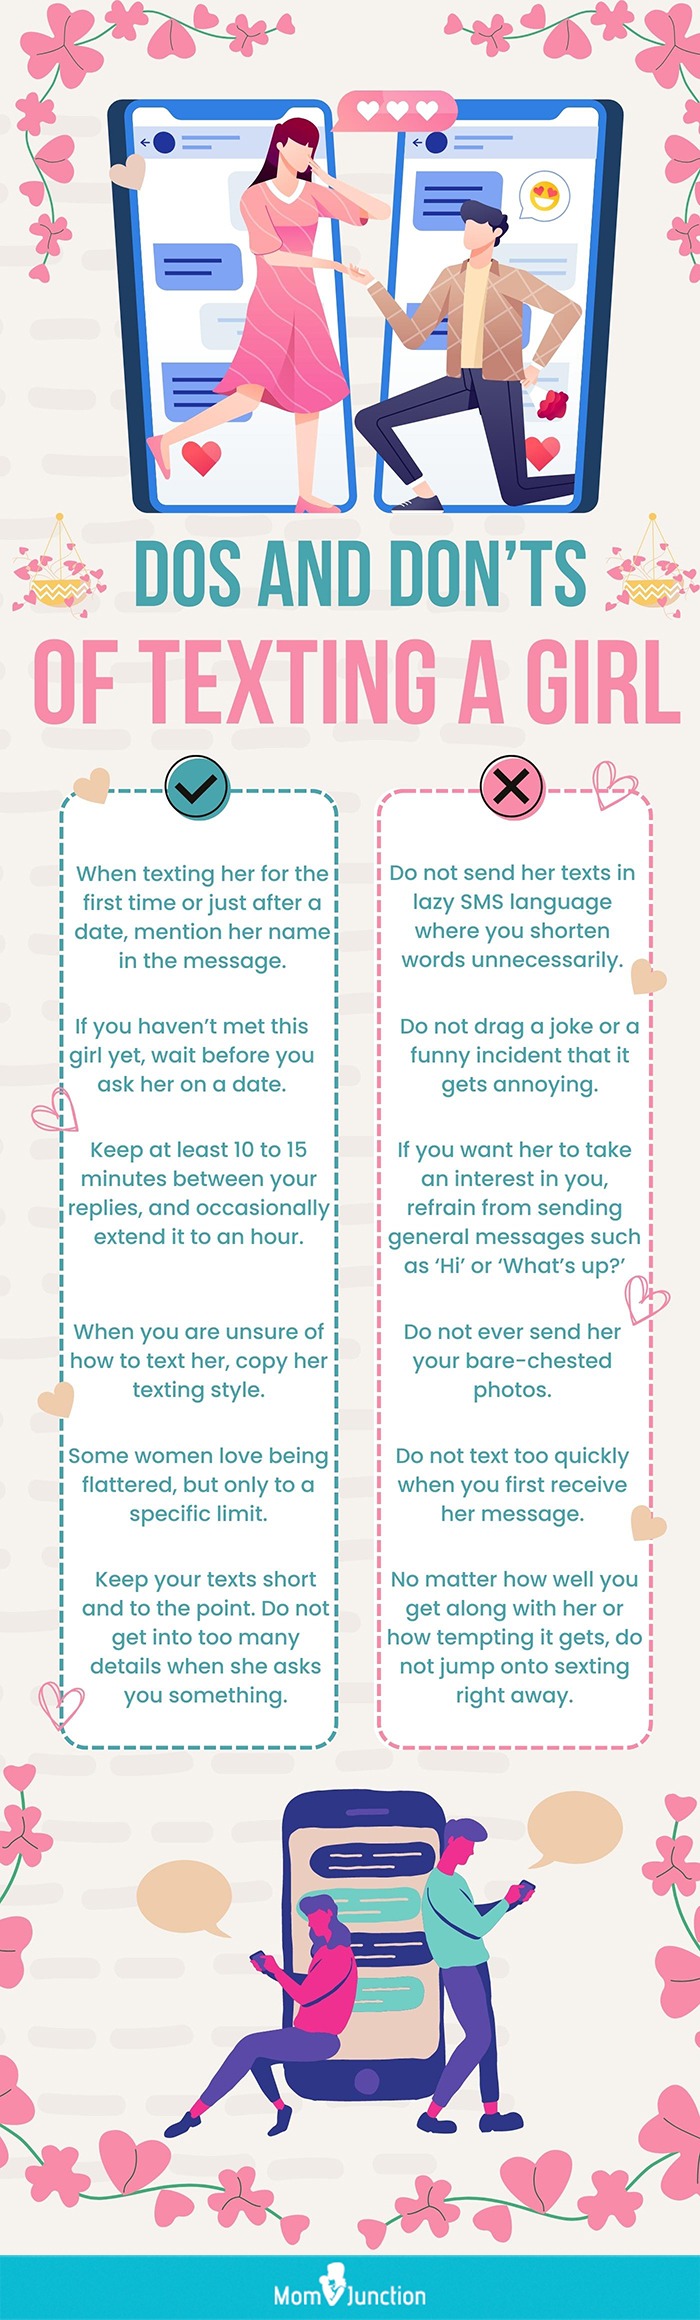 dos and donts of texting a girl (infographic)